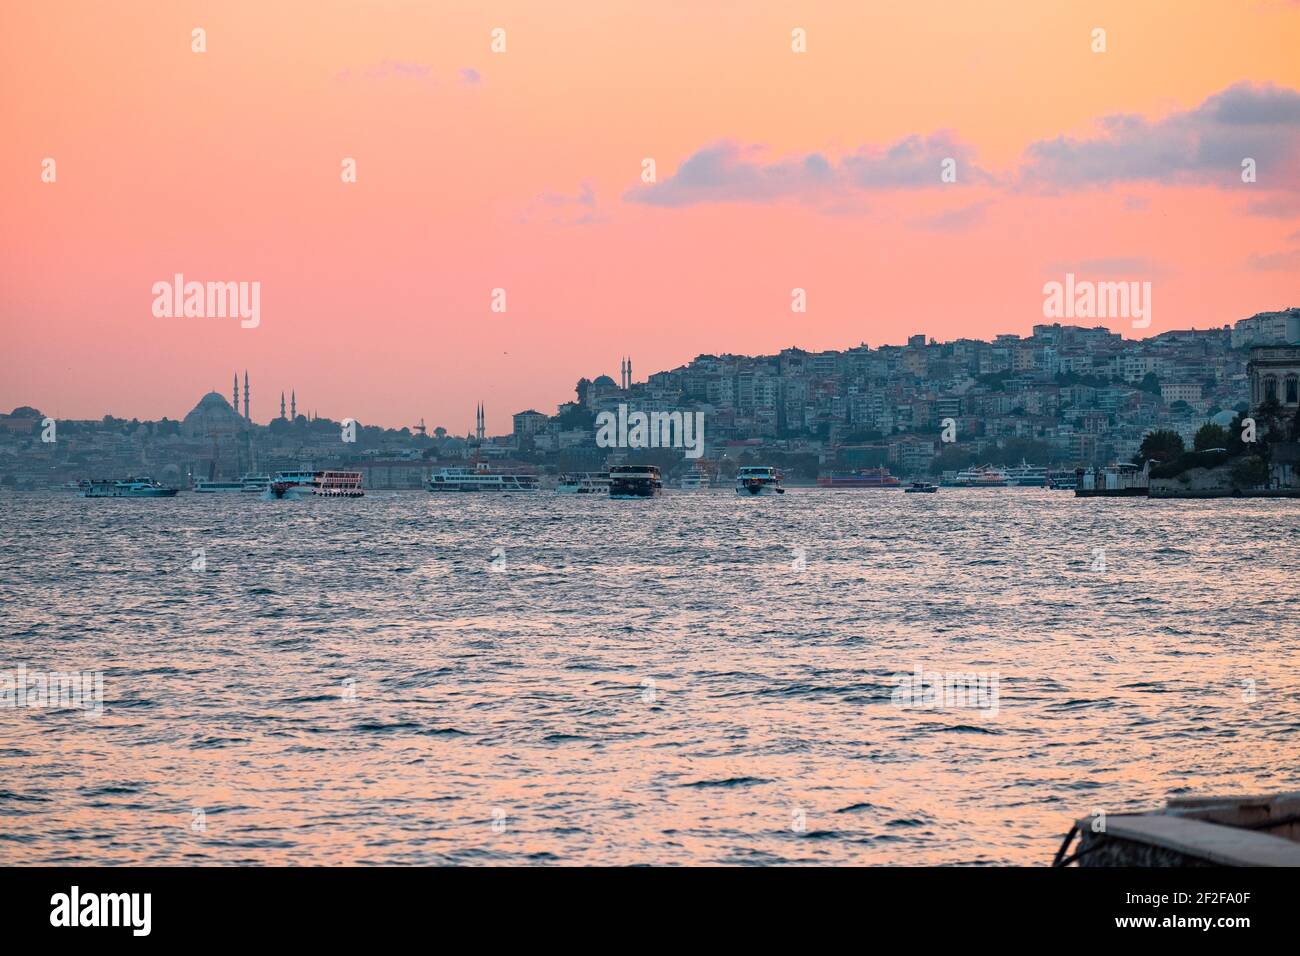 A beautiful calm sea during a golden sunset with boats and a stunning Istanbul city in the background, Turkey Stock Photo